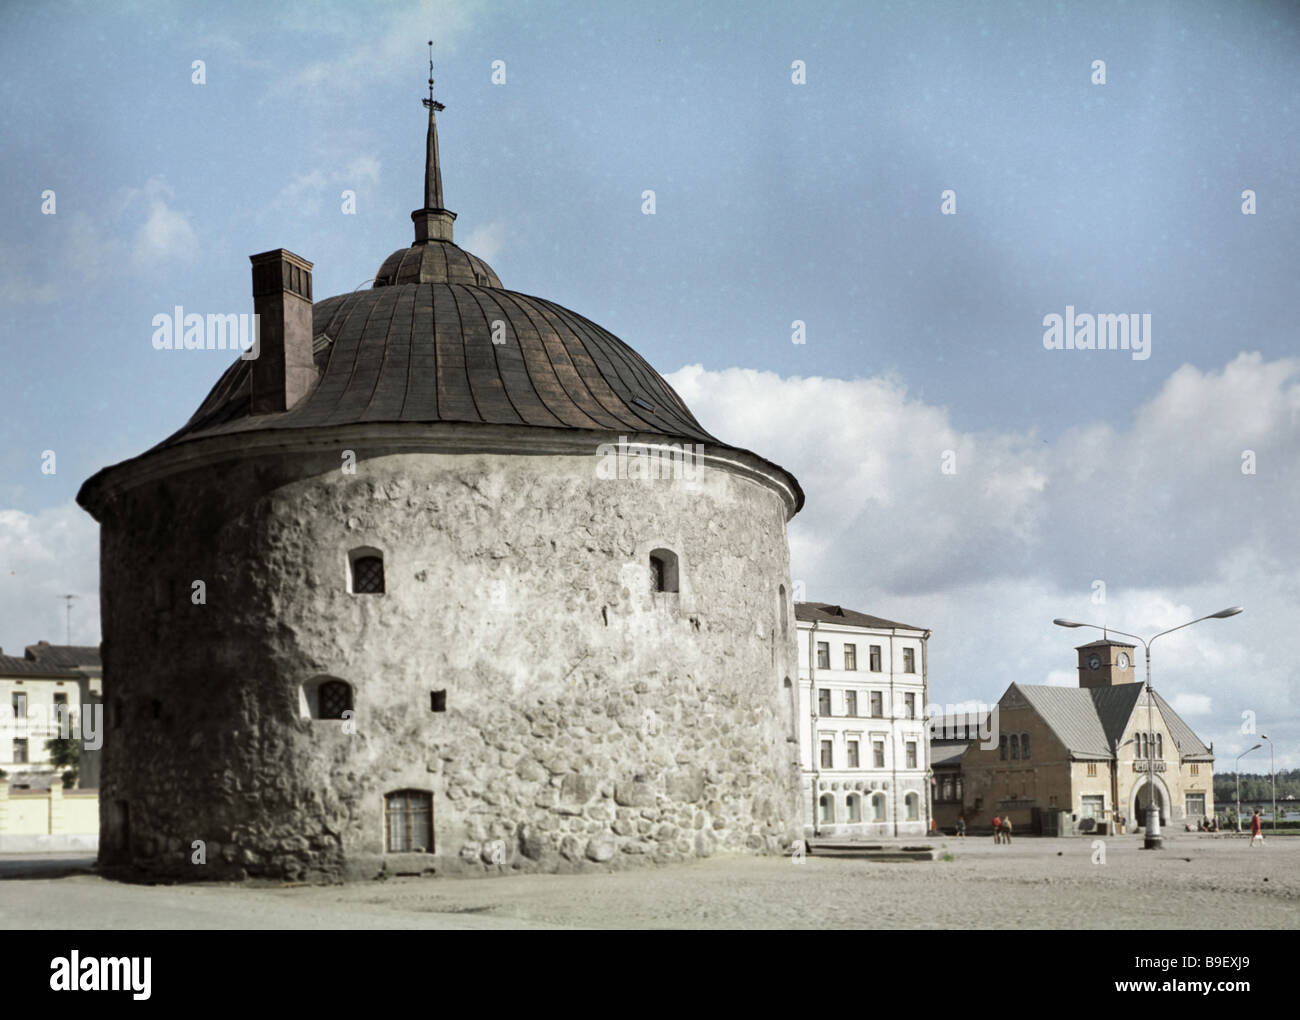 The Round Tower in Market Square in Vyborg Stock Photo